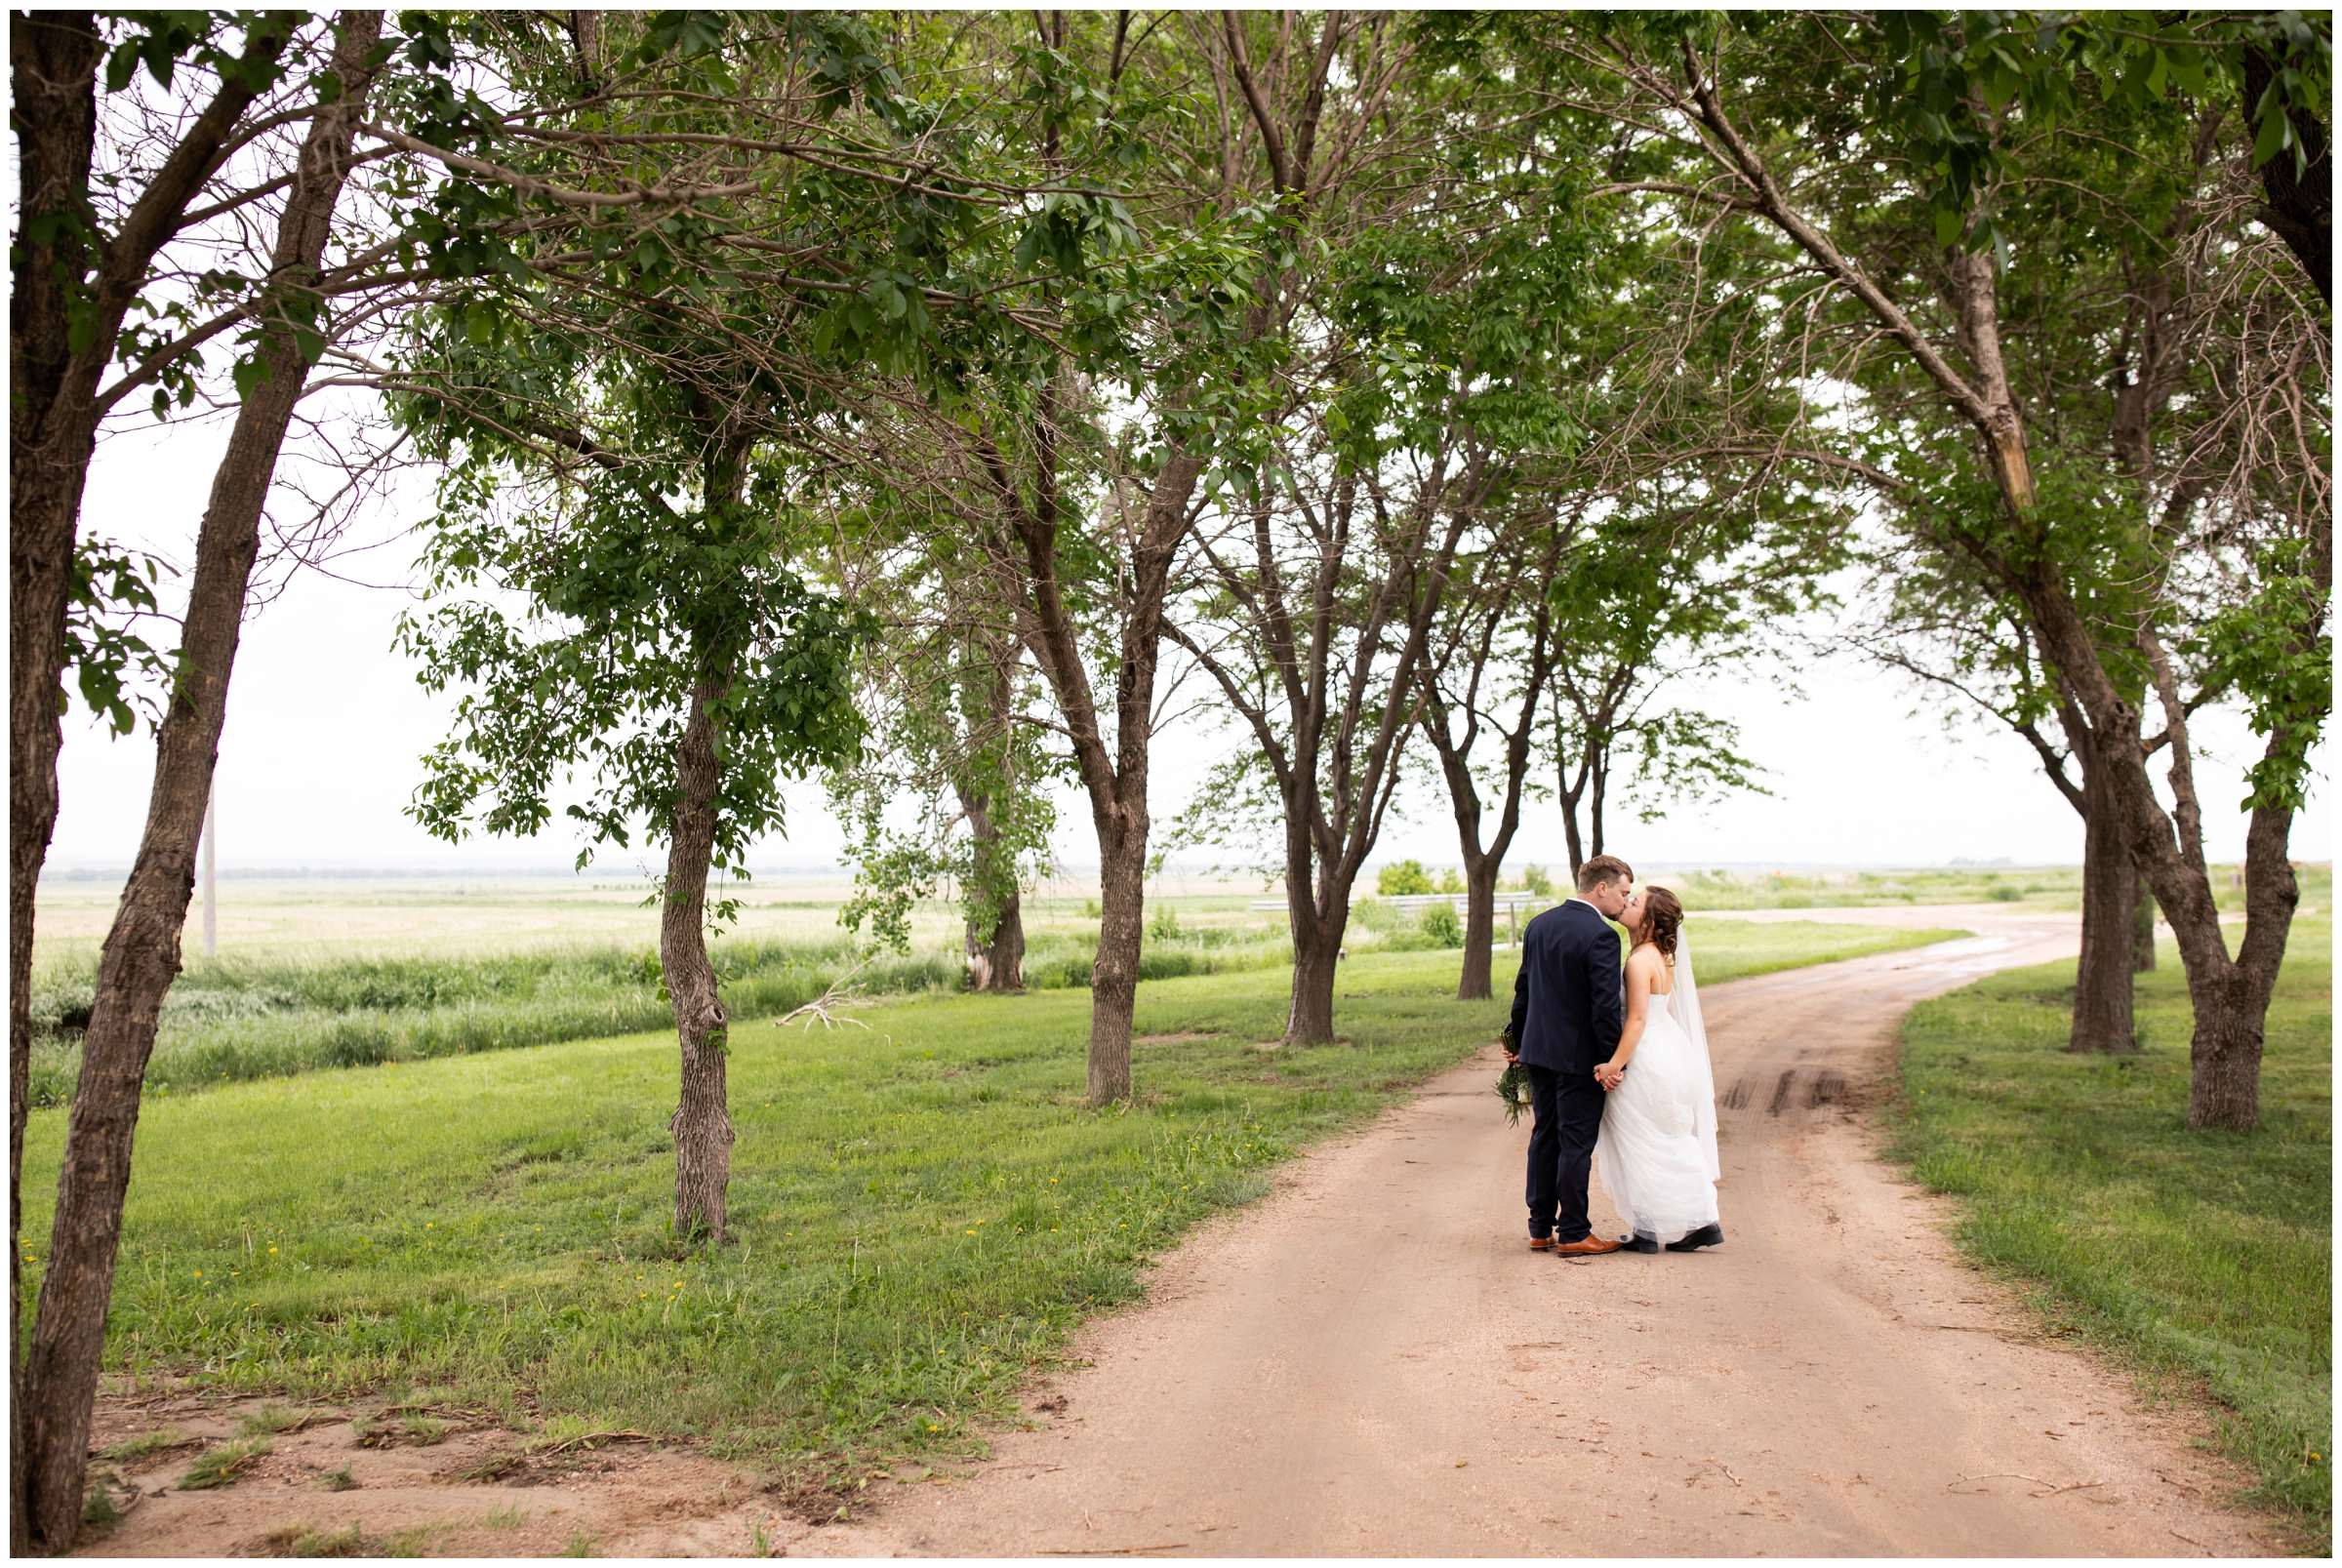 Crook Colorado wedding photos during the summer by rustic wedding photographer Plum Pretty Photography